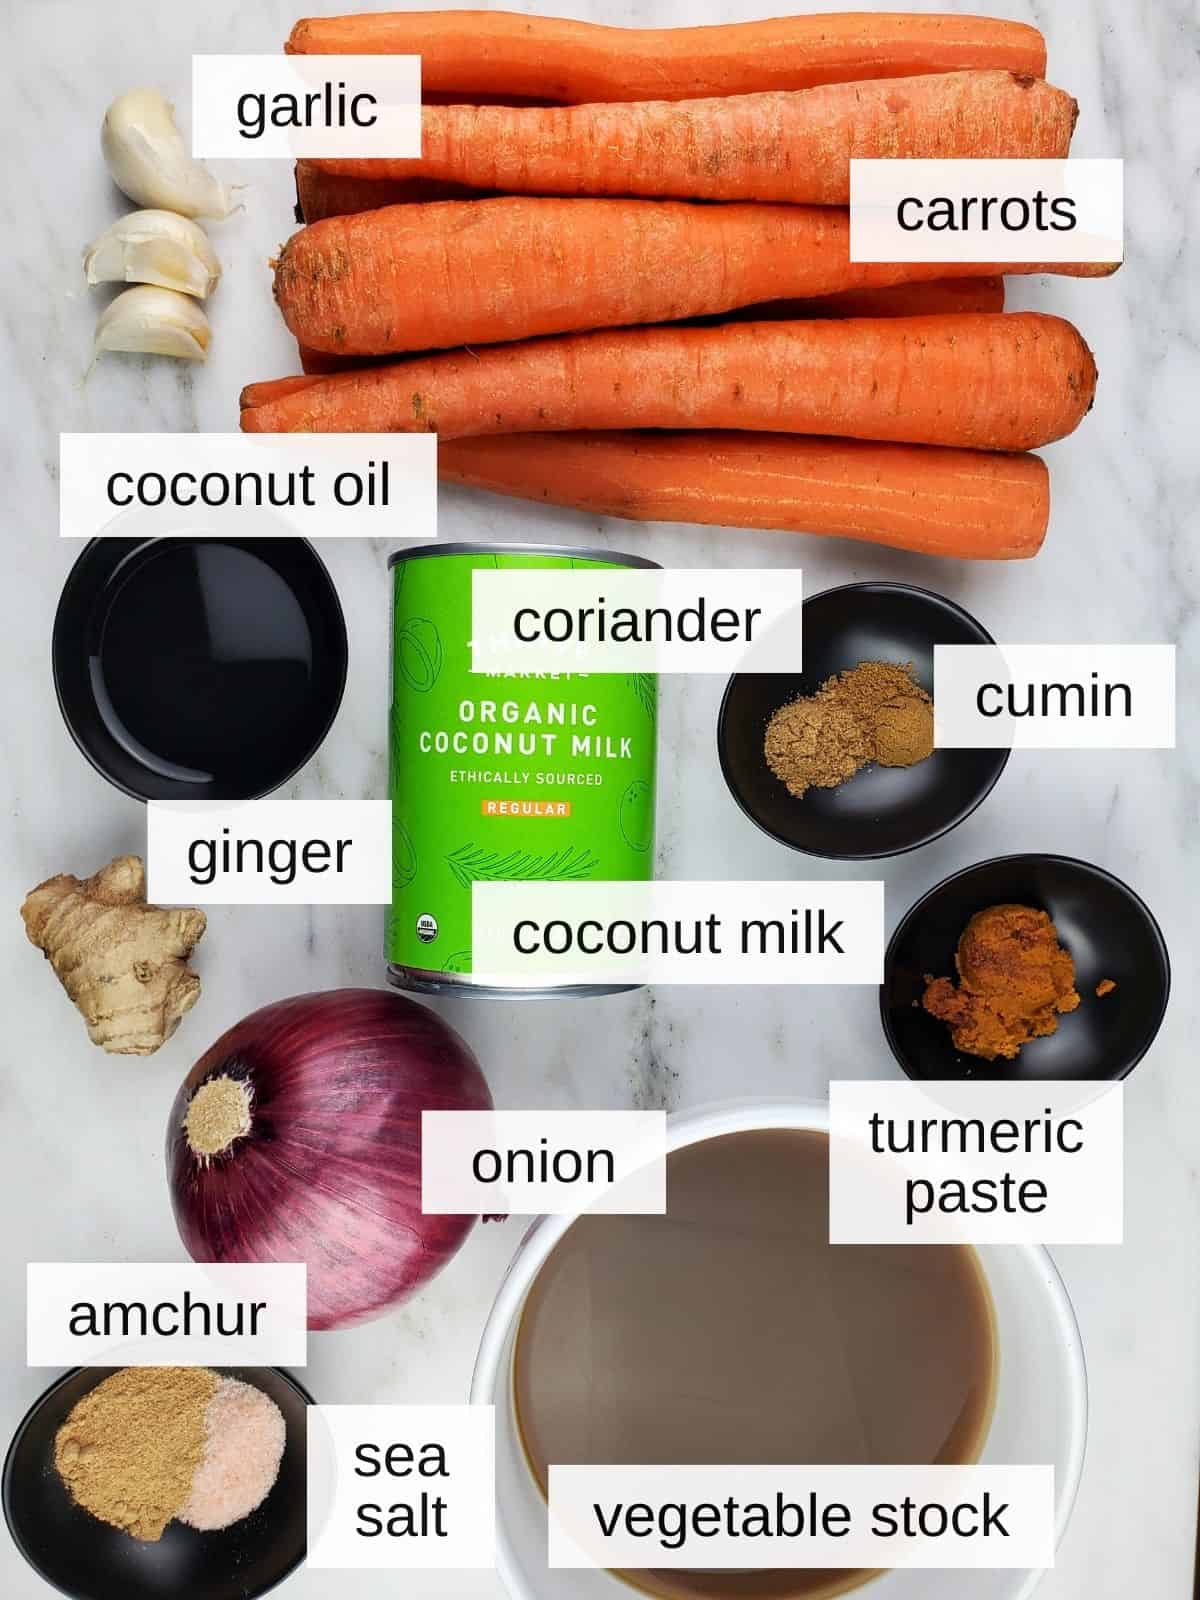 ingredients for carrot ginger coconut soup, including red onion, coconut milk, ginger, turmeric, coriander, cumin, sea salt, amchur powder, garlic, coconut oil, and carrots.